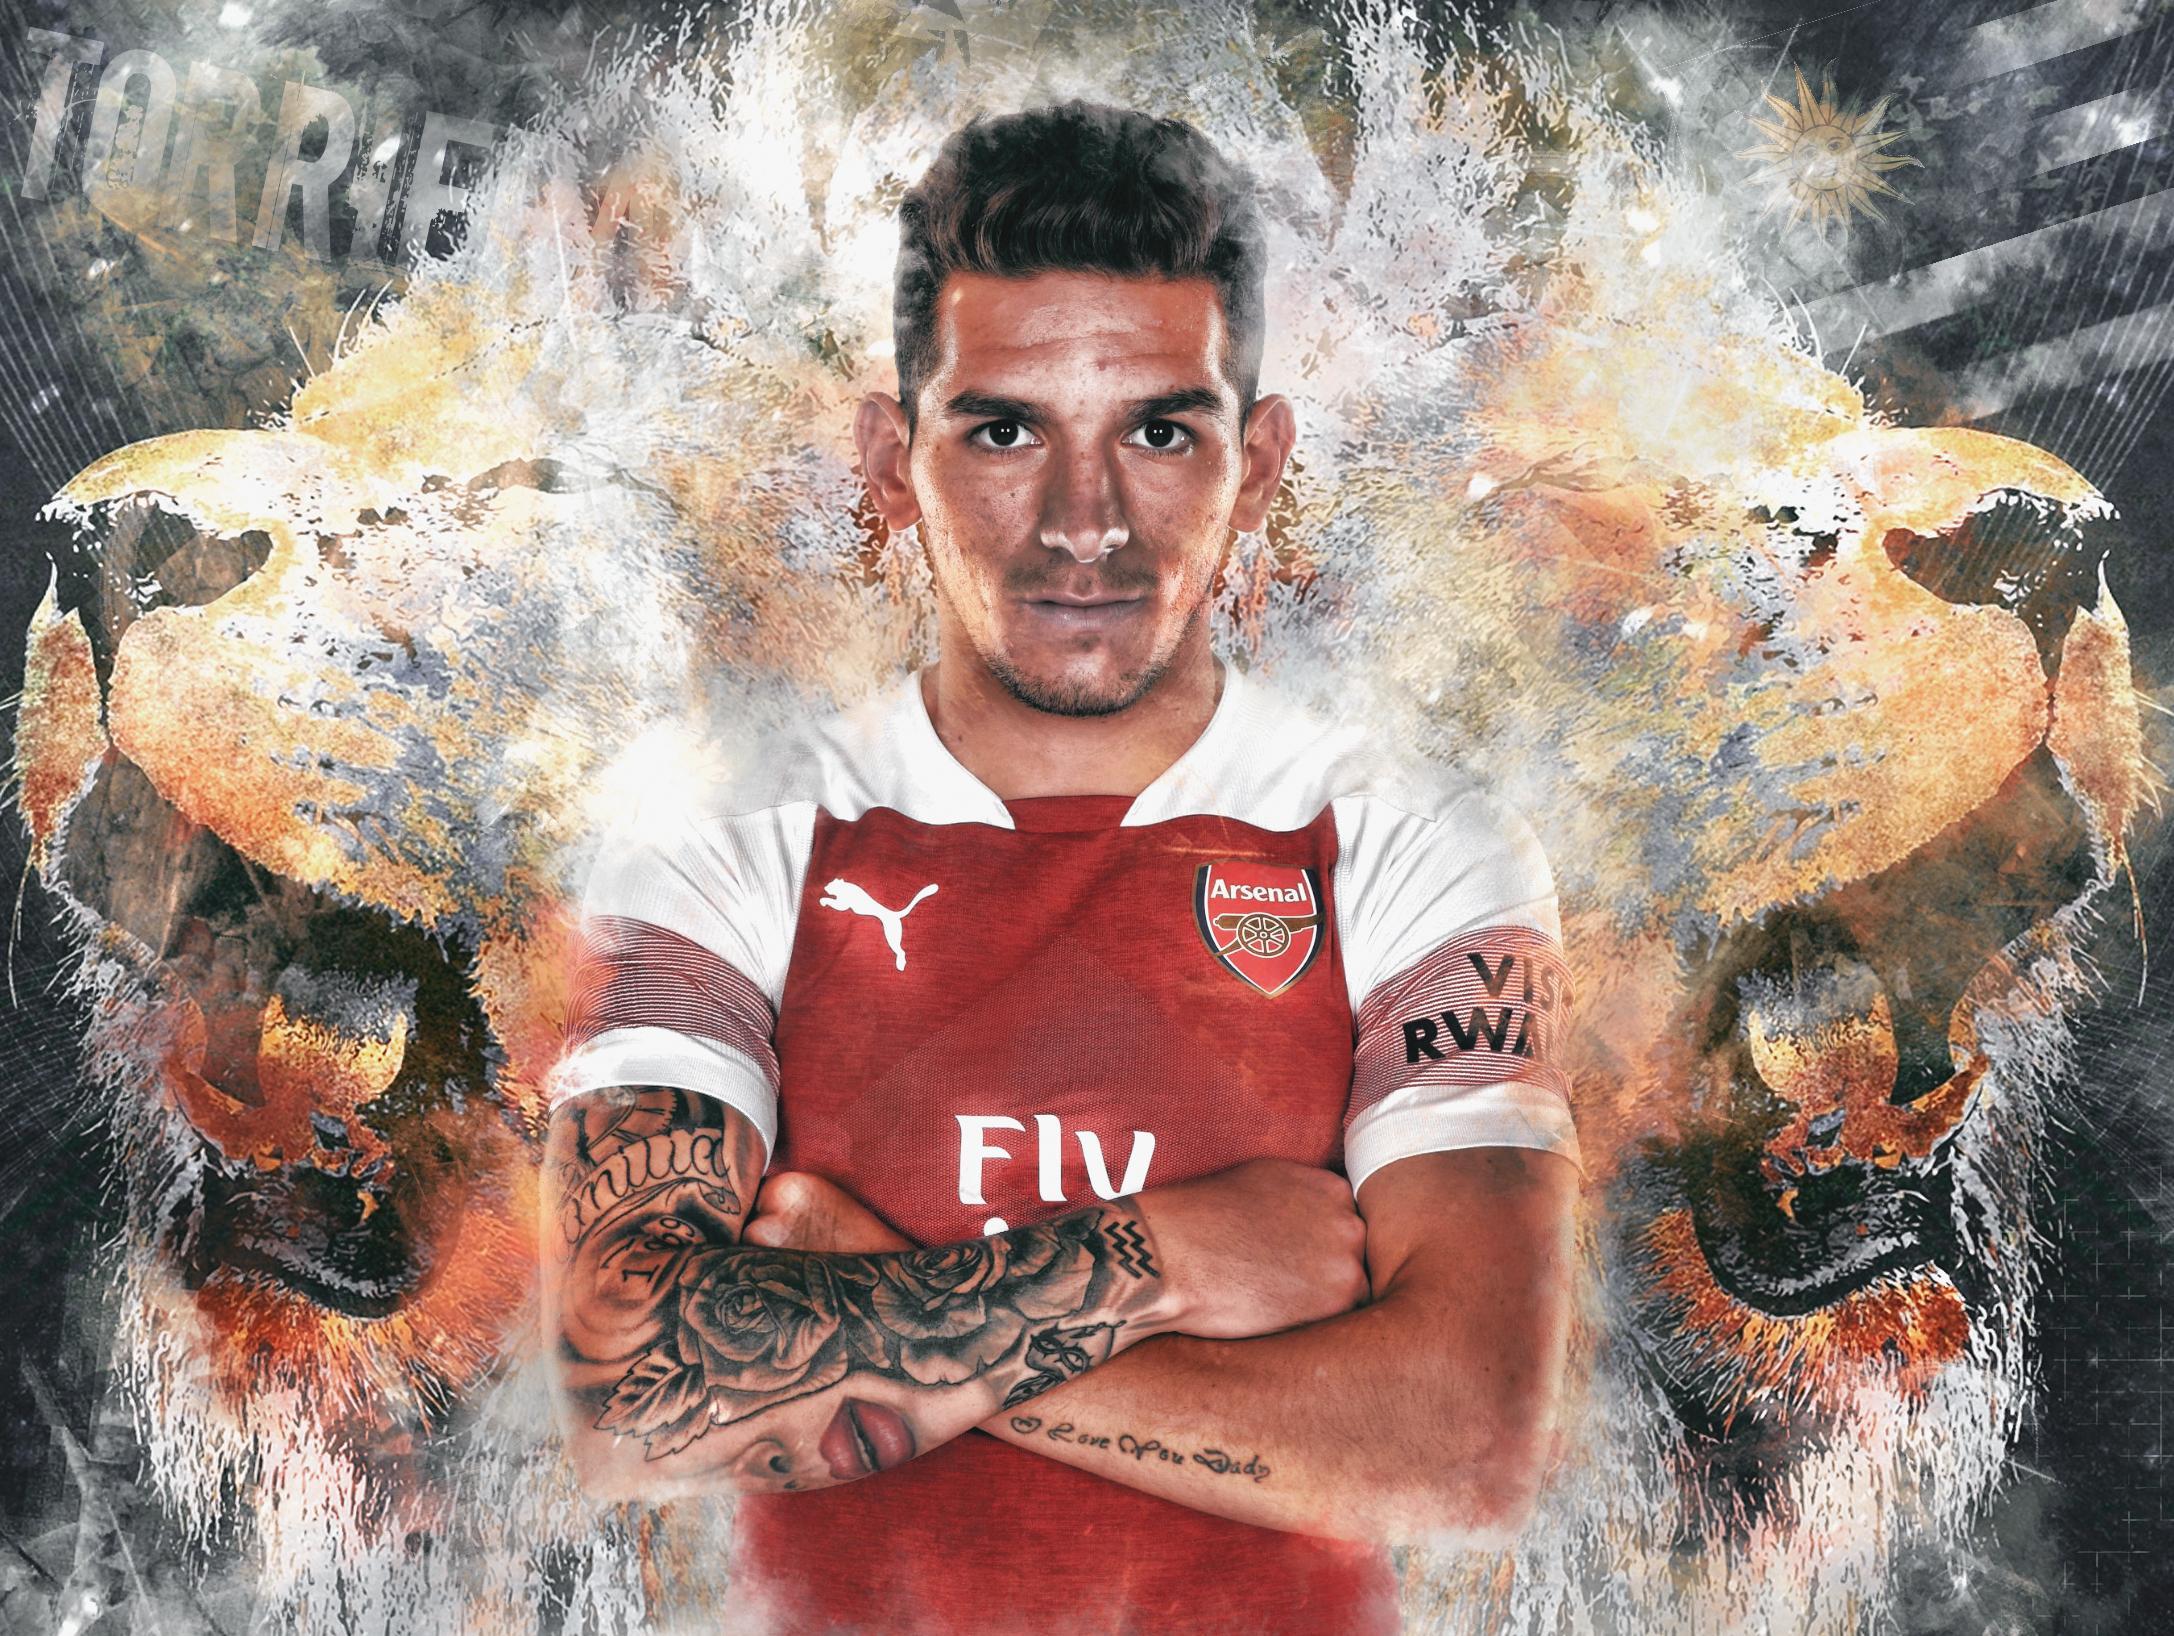 Was a little sad I was late to the Torreira editing competition